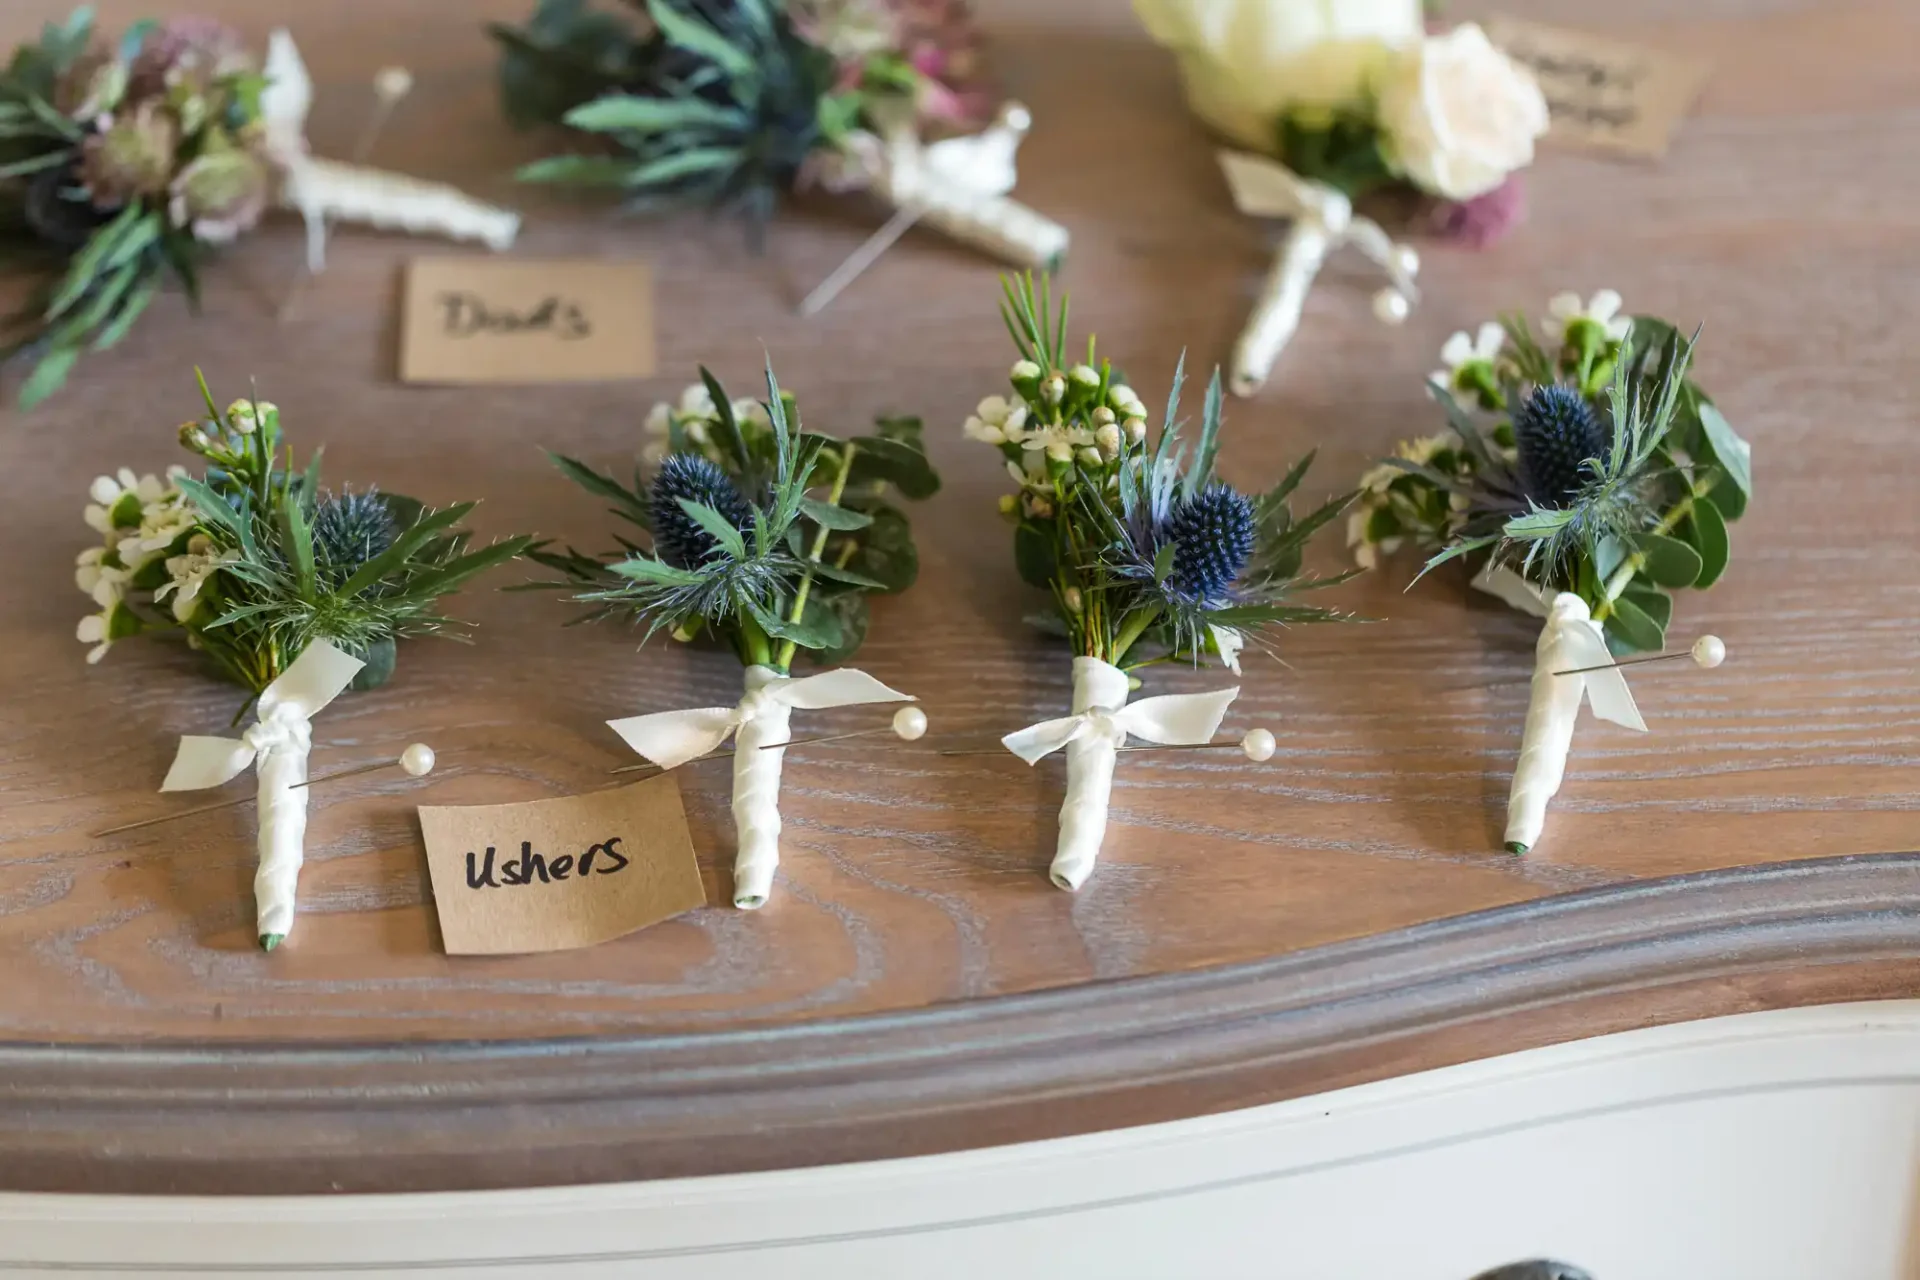 Boutonnieres with tags labeled "dads" and "ushers" laid out on a wooden surface.